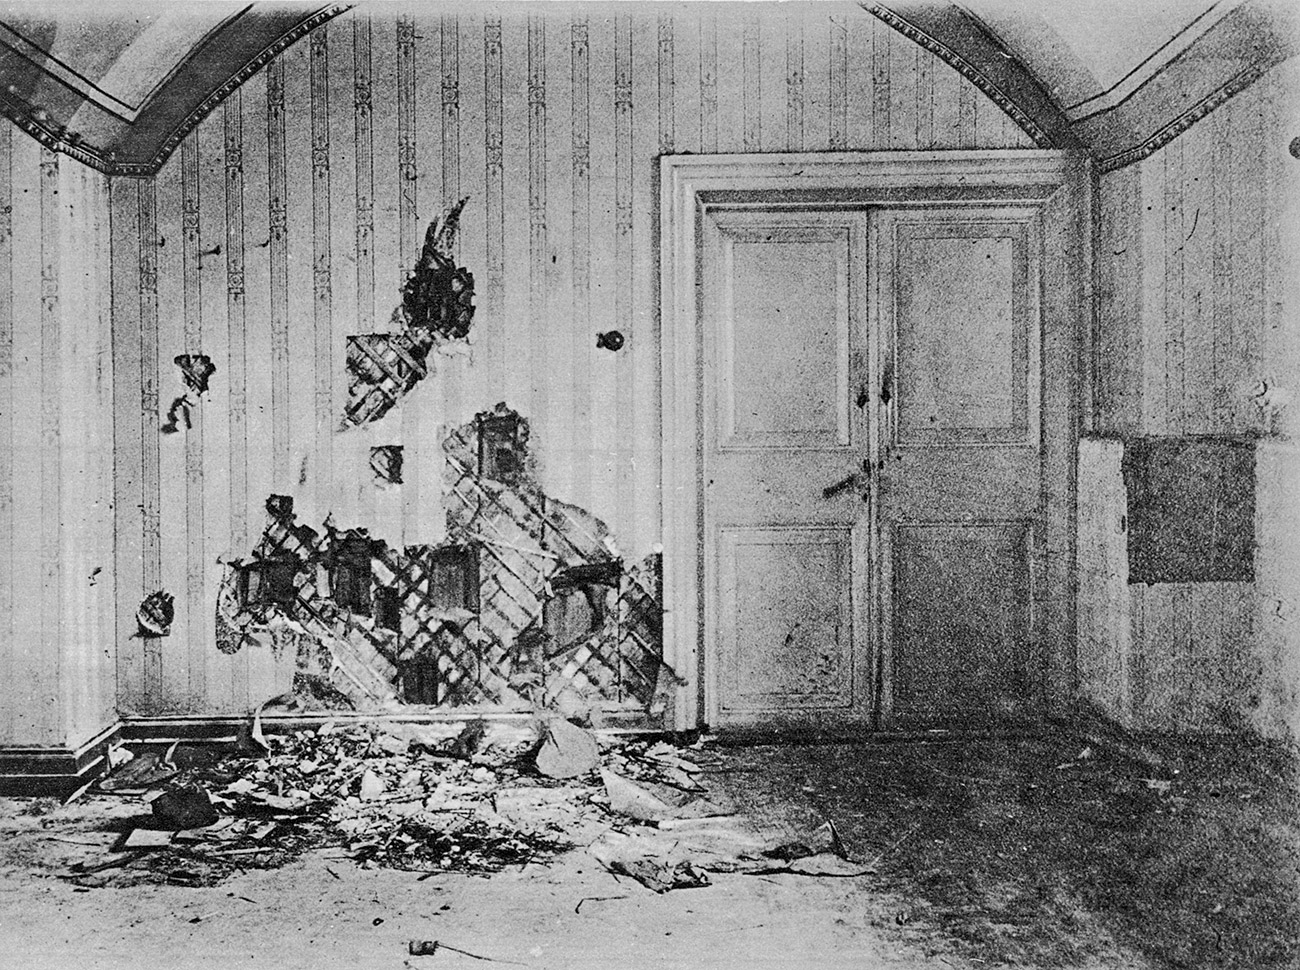 Room in the house of Ipatiev, Ekaterinburg, where the Russian royal family was brutally murdered. 1918